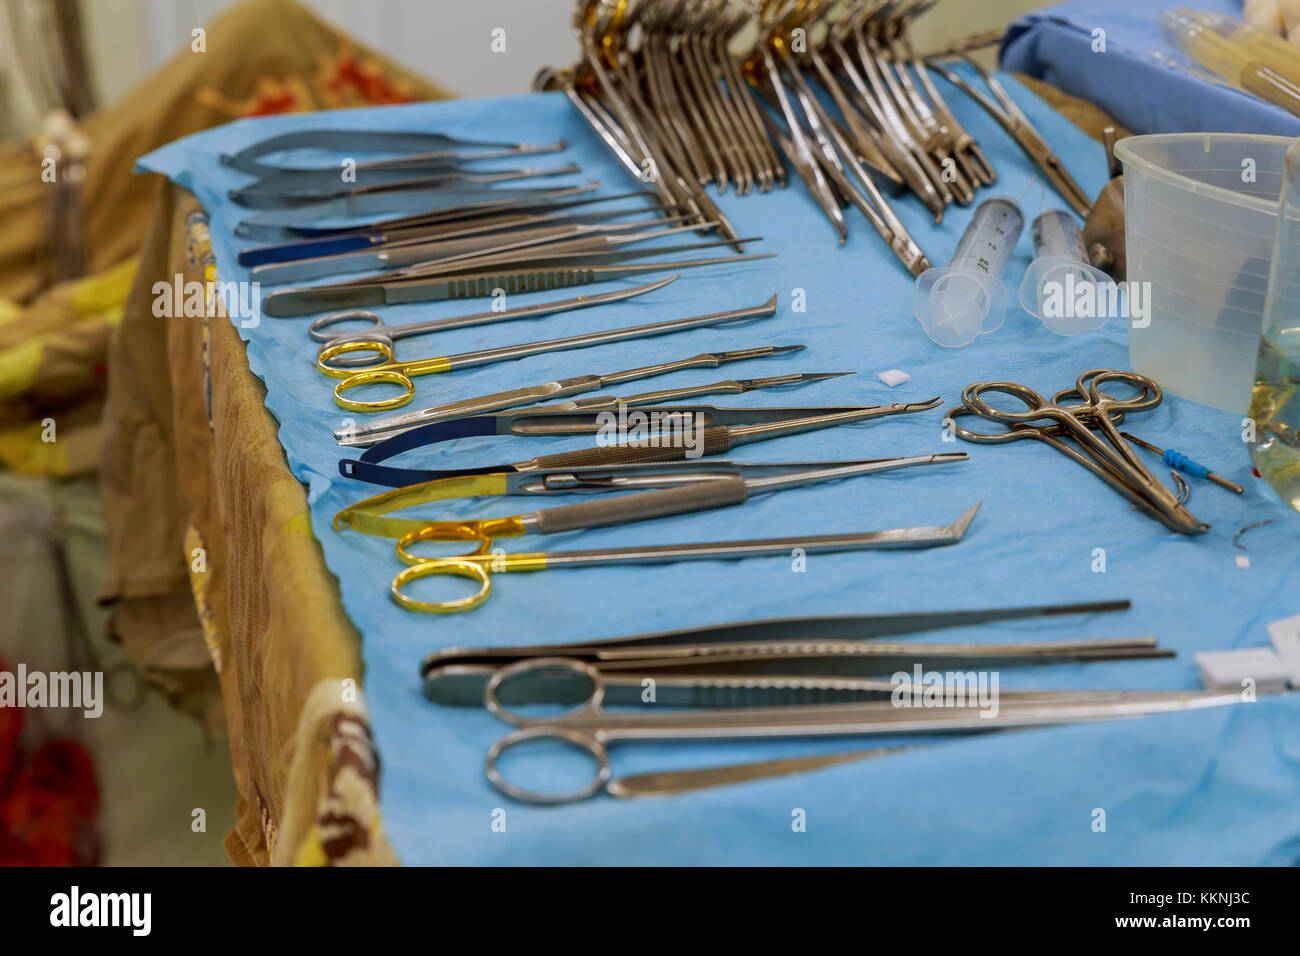 Focus at the scaples,the tools including scalpels, forceps and tweezers arranged on a table for a surgery surgical preparation for surgery tools Stock Photo